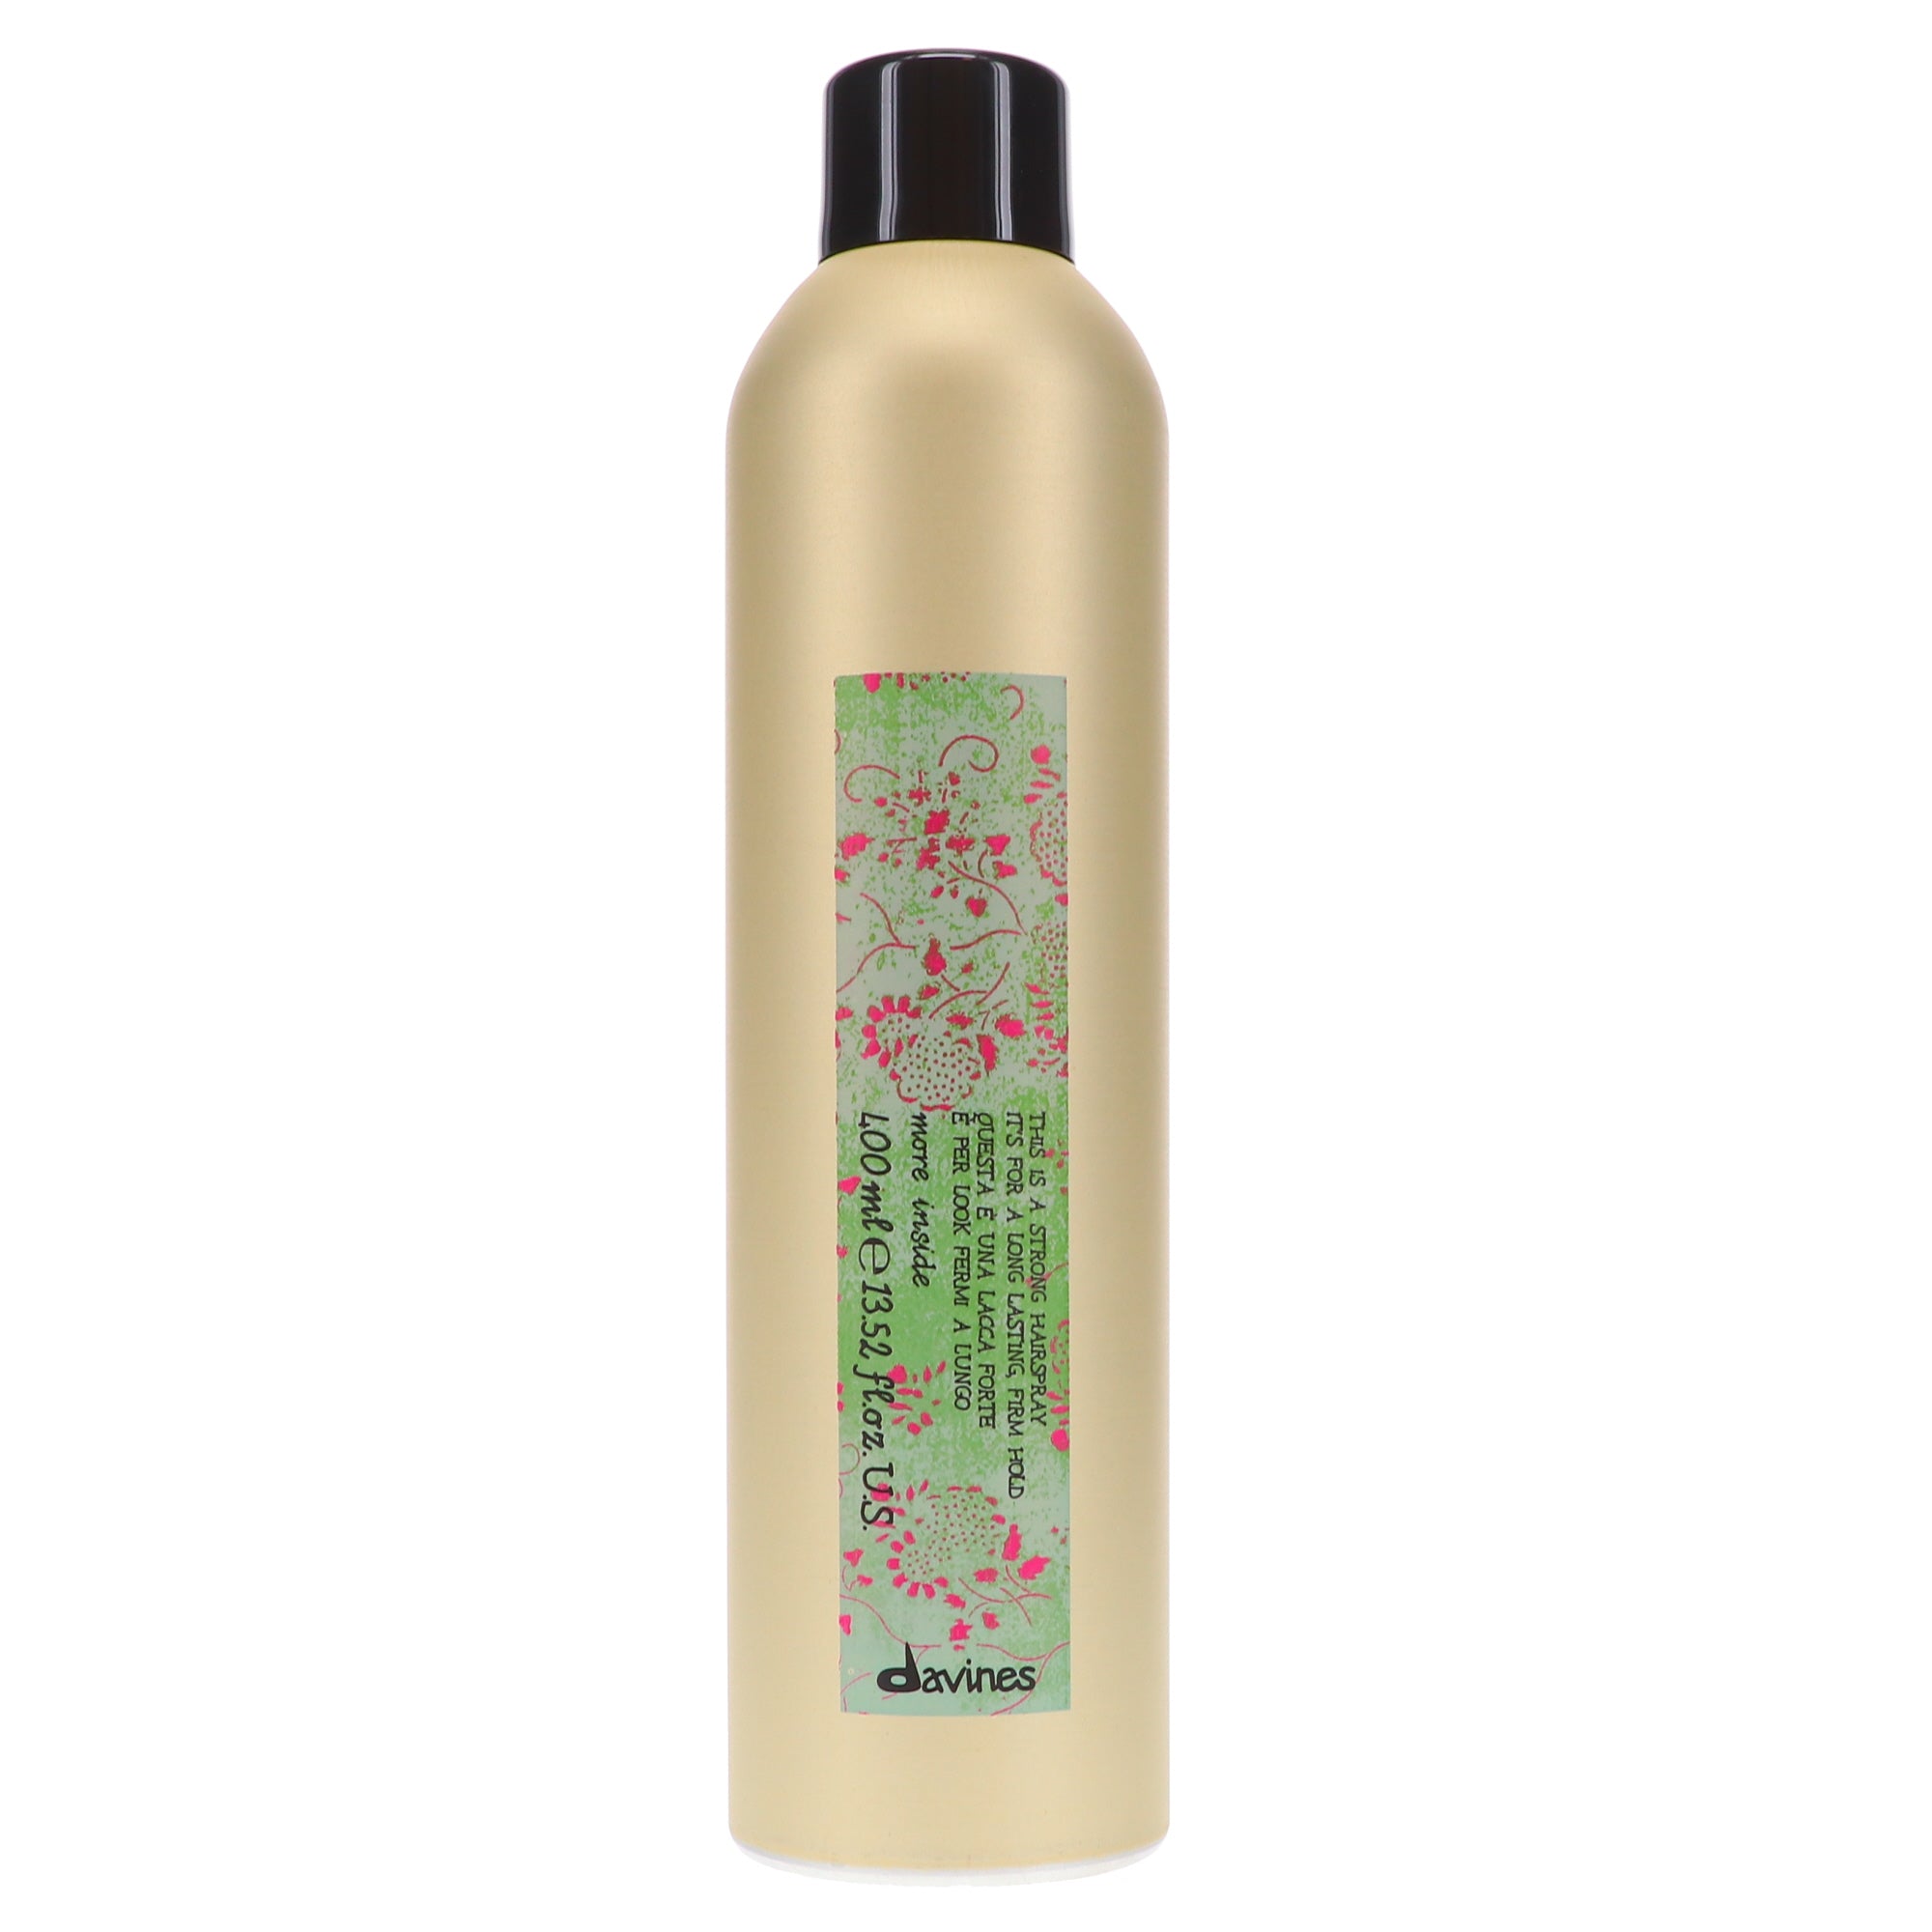 This is a Strong Hair Spray by Davines